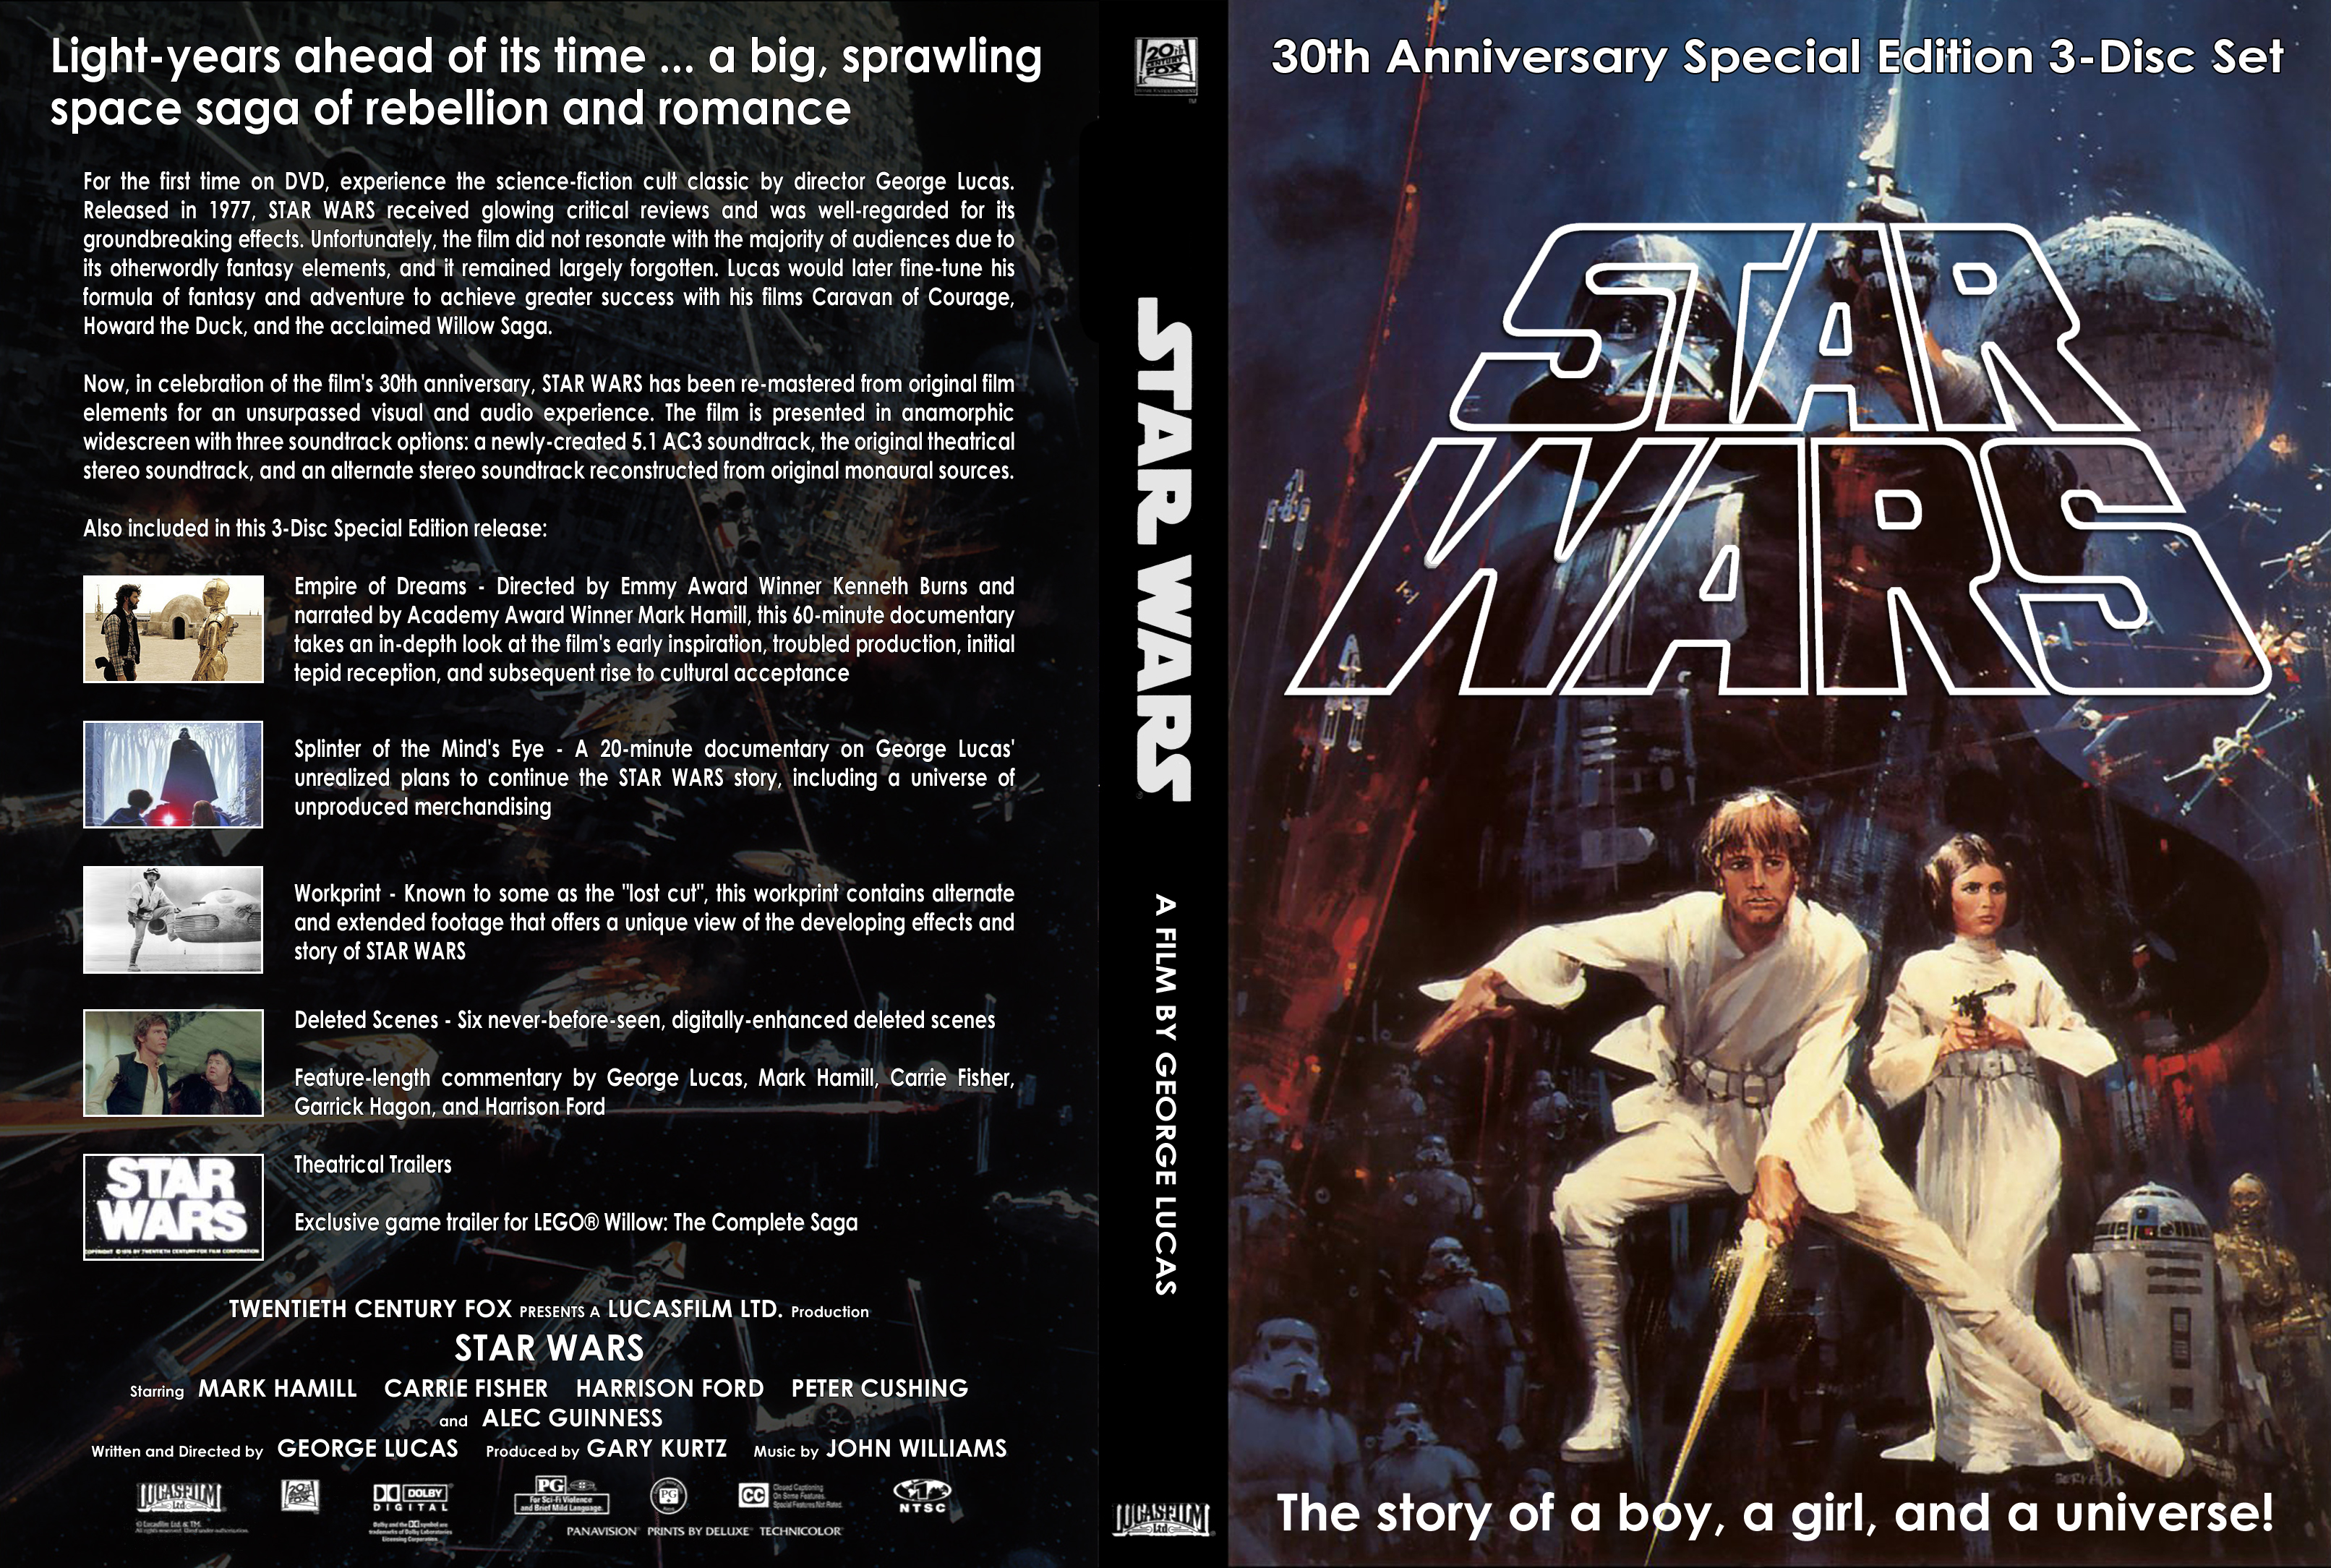 Star Wars DVD Covers